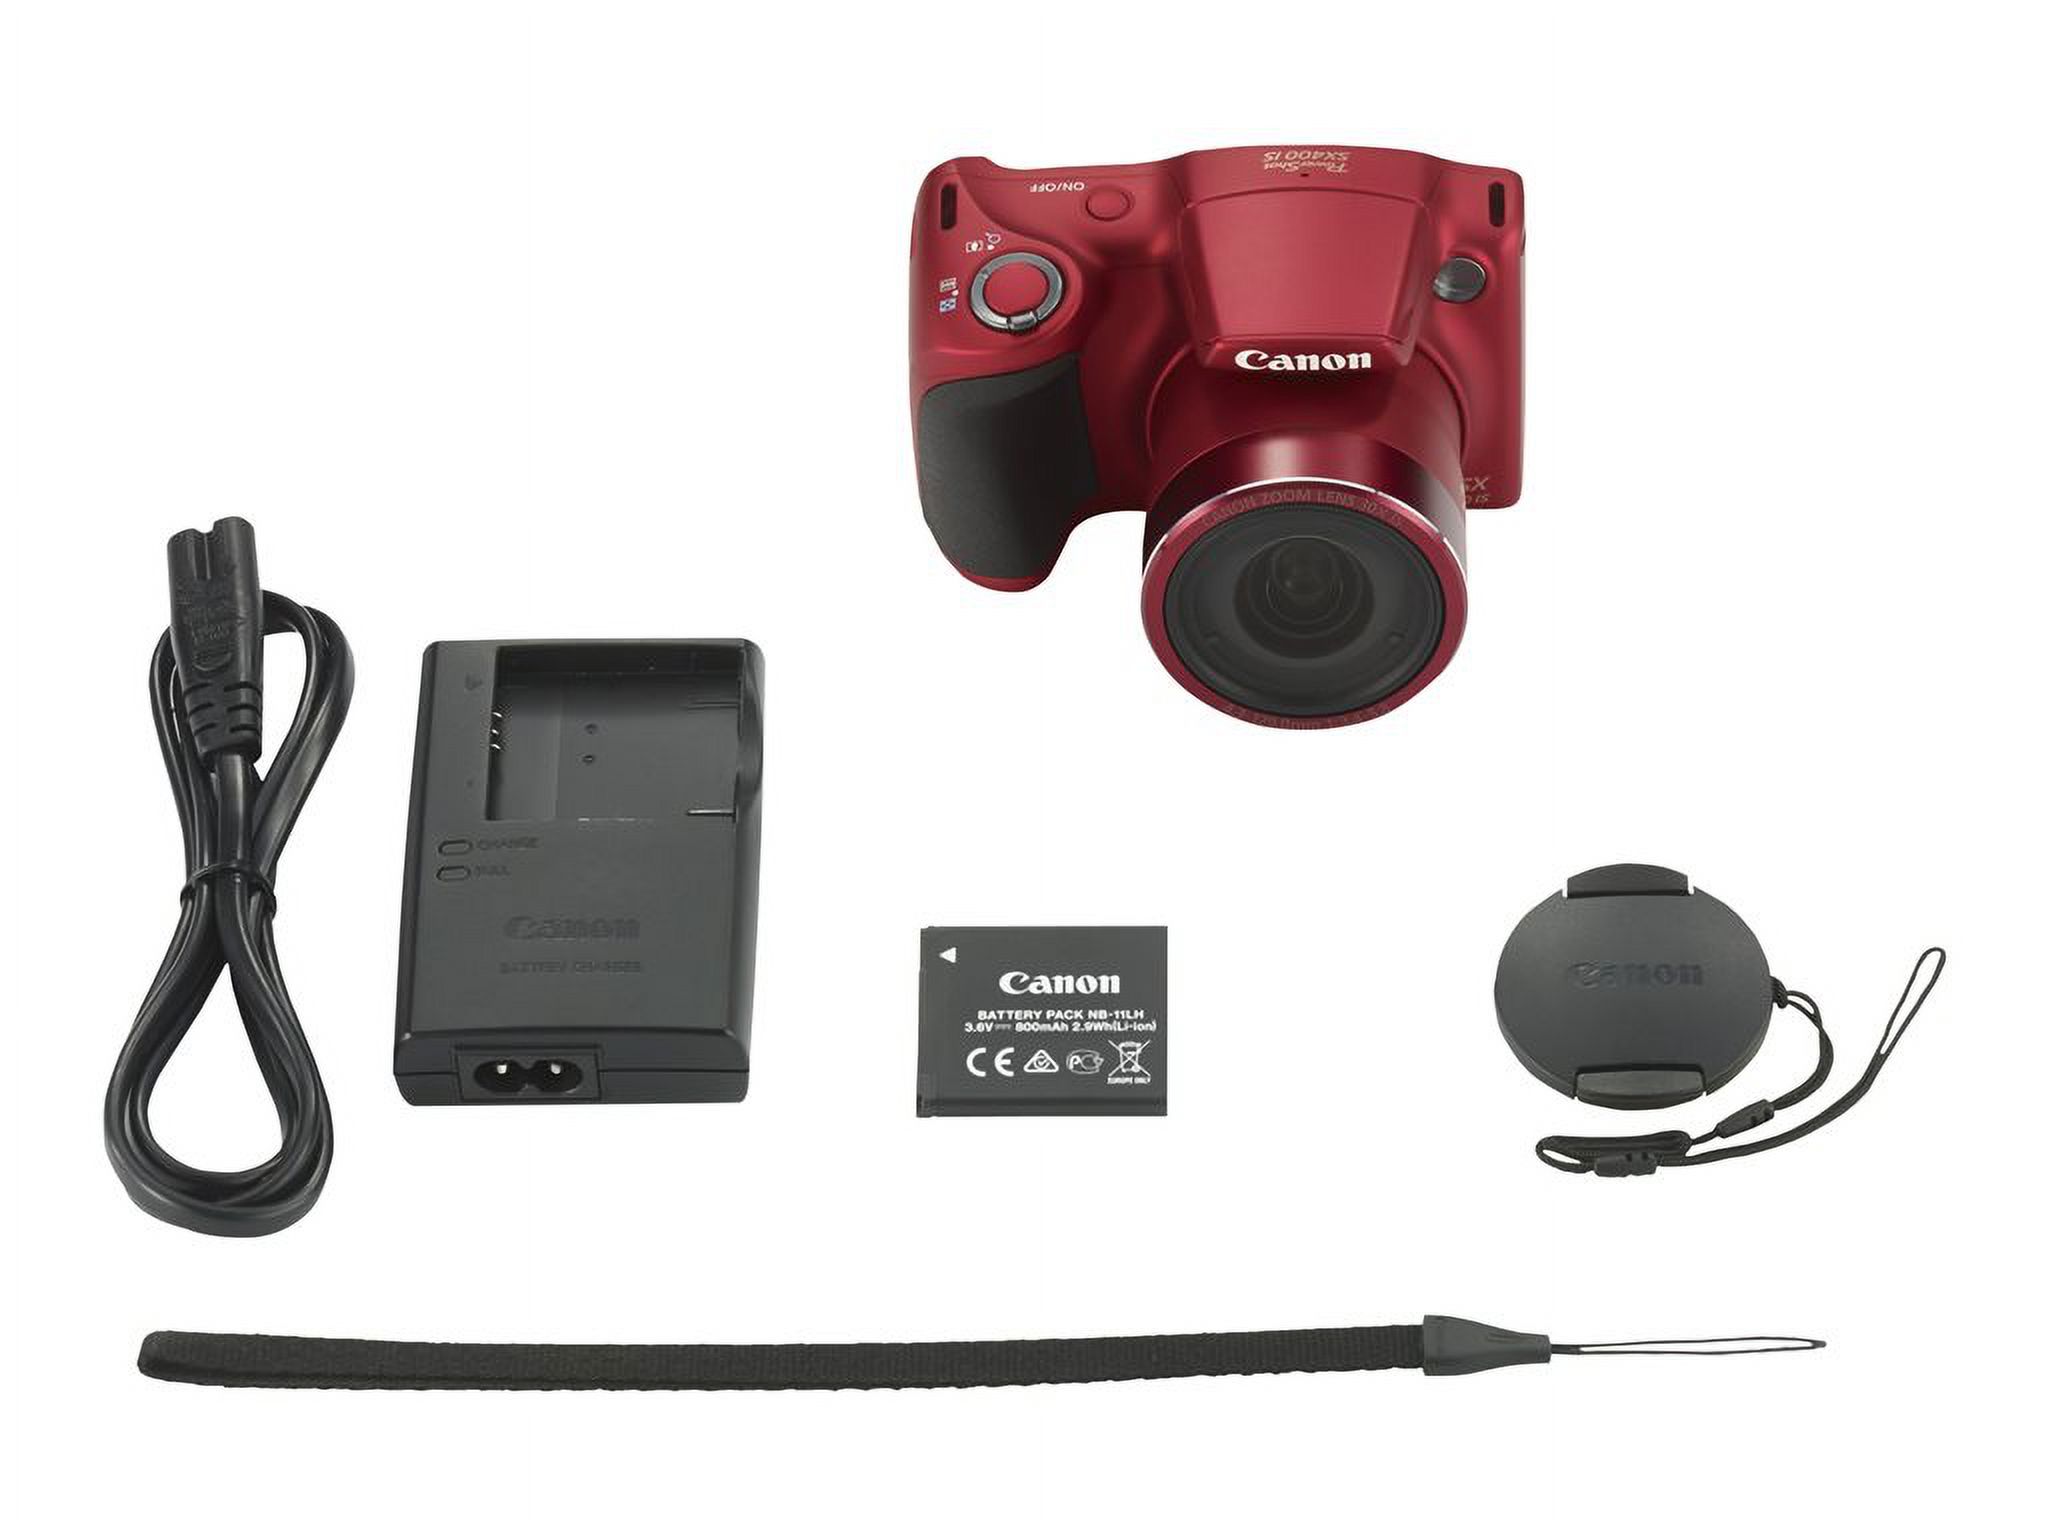 Canon PowerShot SX400 IS - Digital camera - High Definition - compact - 16.0 MP - 30 x optical zoom - red - image 37 of 72